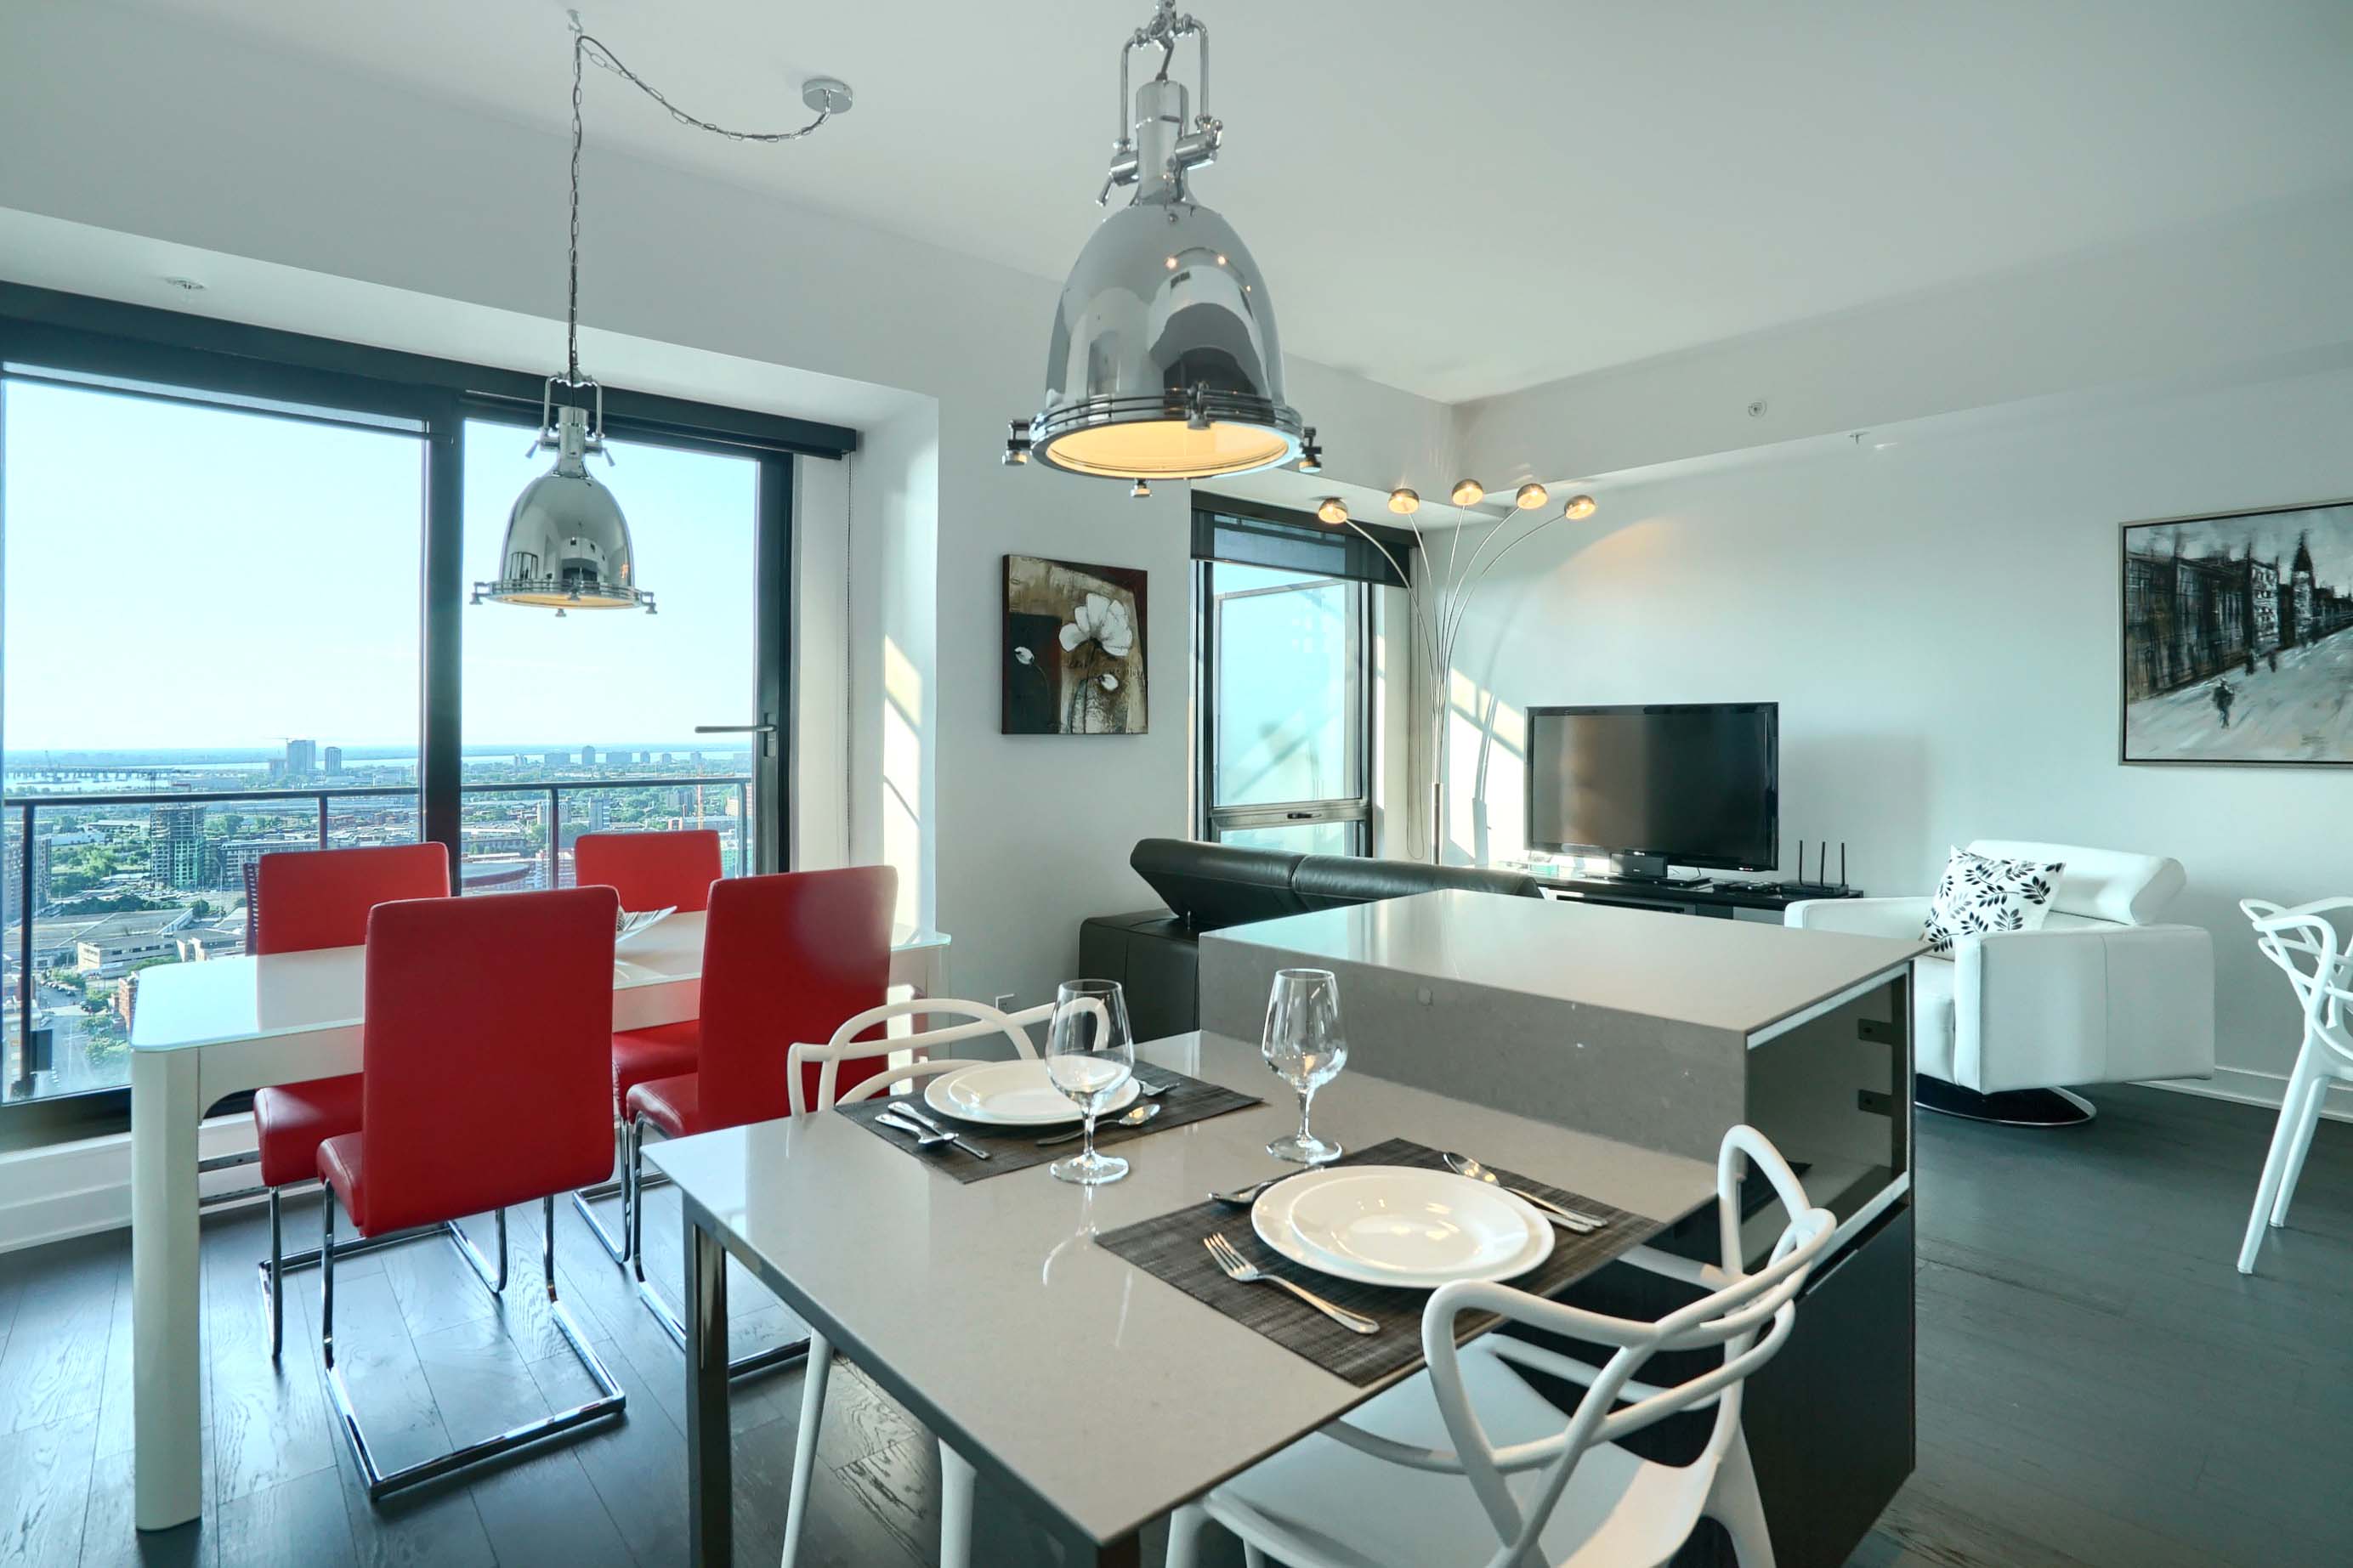 View of the living space of this furnished rental in montreal. Dining table with seating for four, kitchenette with seating for two, living room, flat screen TV and floor-to-ceiling windows for a sunny stay in montreal